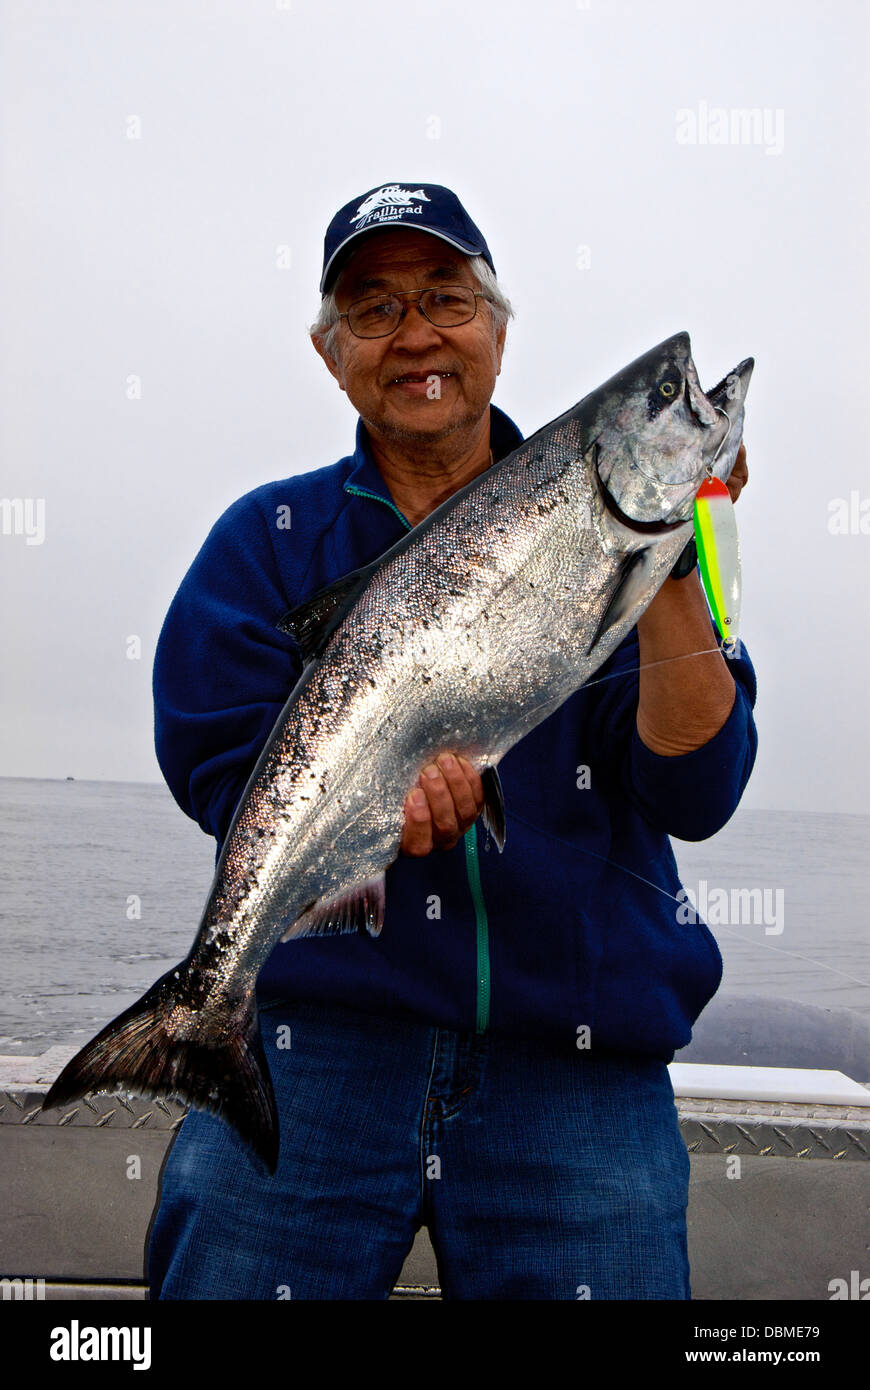 https://c8.alamy.com/comp/DBME79/happy-smiling-asian-angler-holding-sport-caught-chinook-salmon-trolling-DBME79.jpg